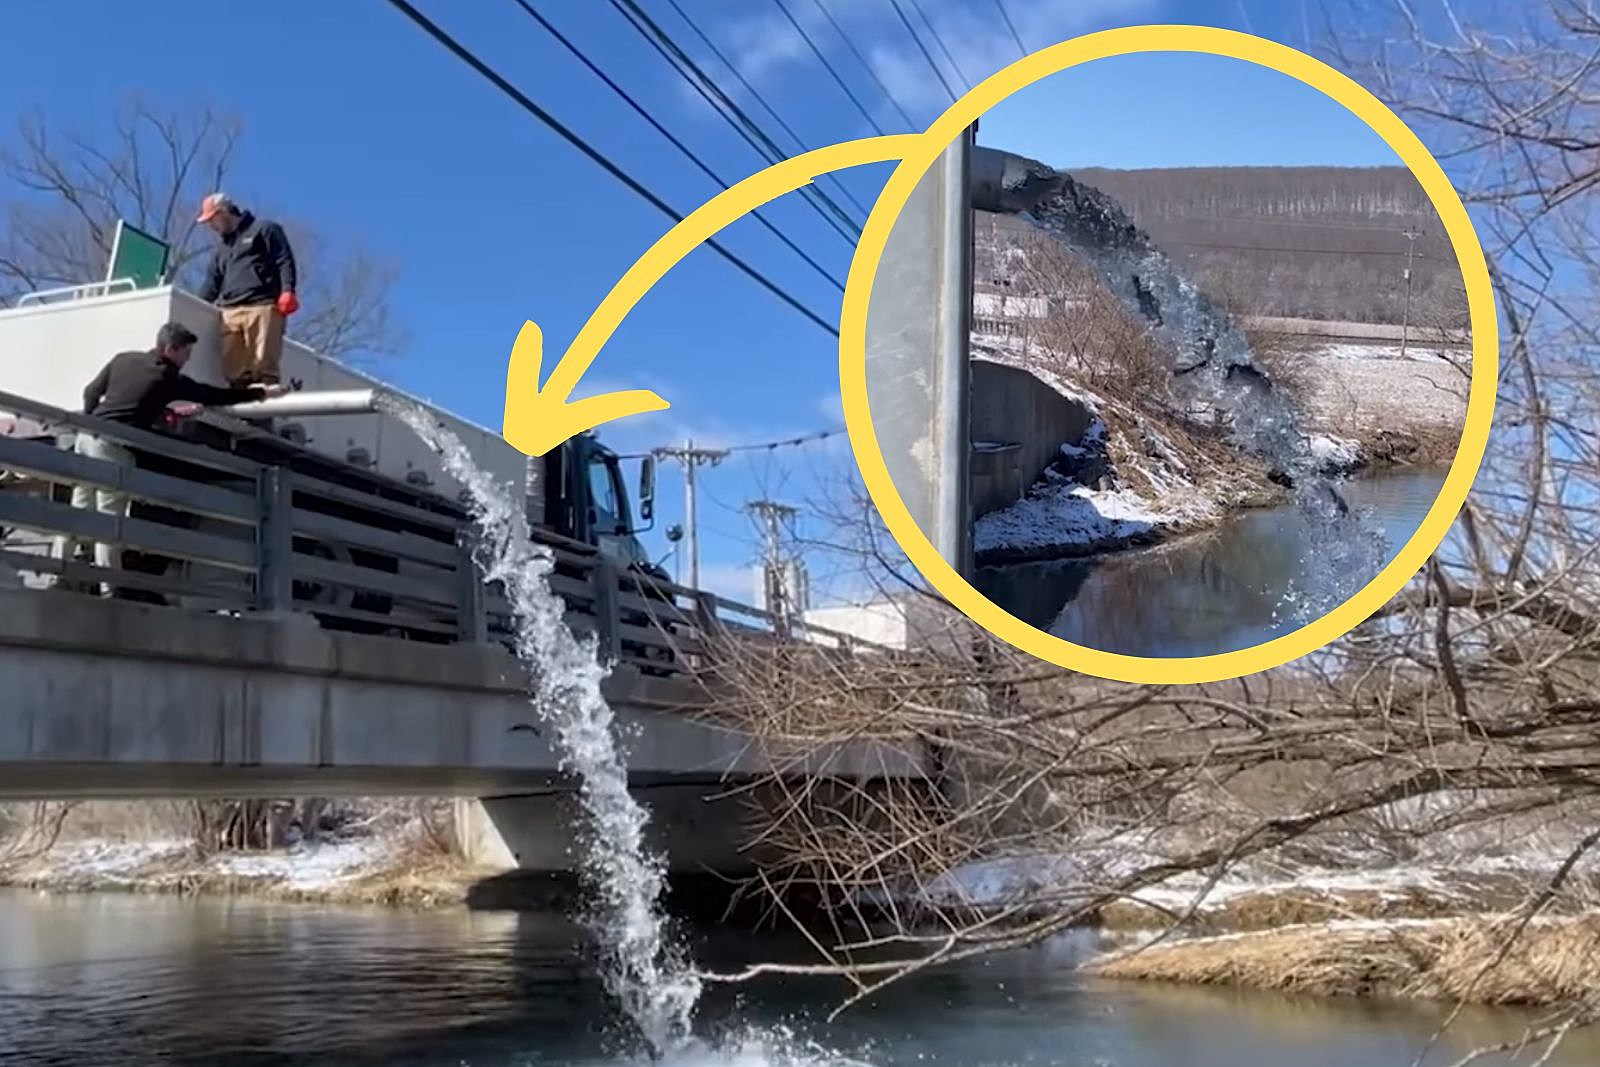 Watch Video of the NY DEC's Giant Fish Tanker